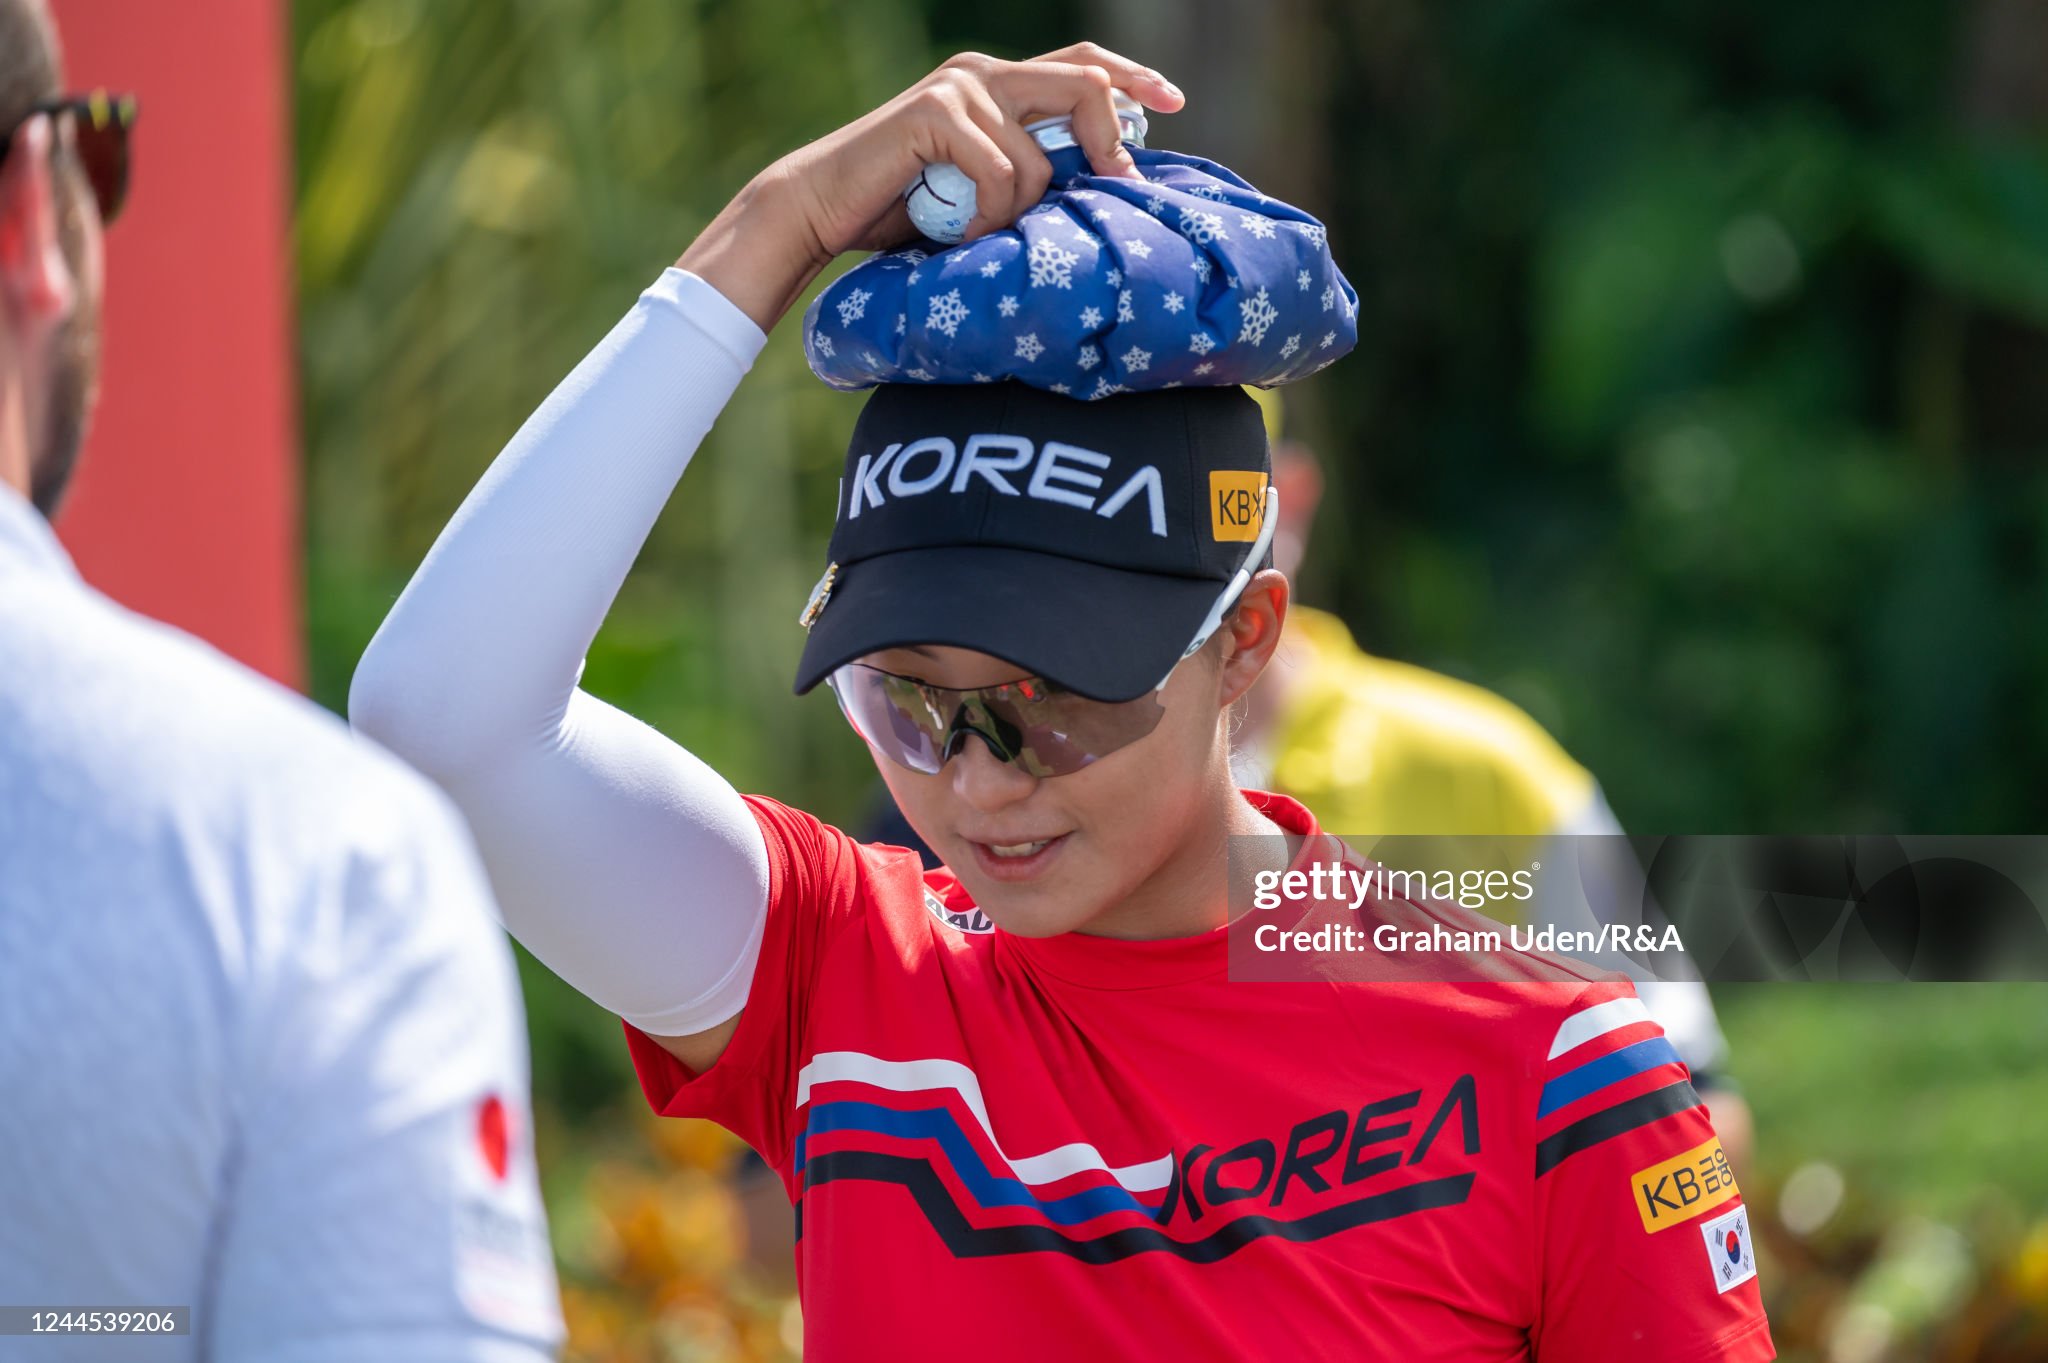 https://media.gettyimages.com/id/1244539206/photo/the-womens-amateur-asia-pacific-championship-day-four.jpg?s=2048x2048&w=gi&k=20&c=tfm0SlRoCrbqOSUTLW2PqOc6DZAaHhBcRNXg8BbFlOc=